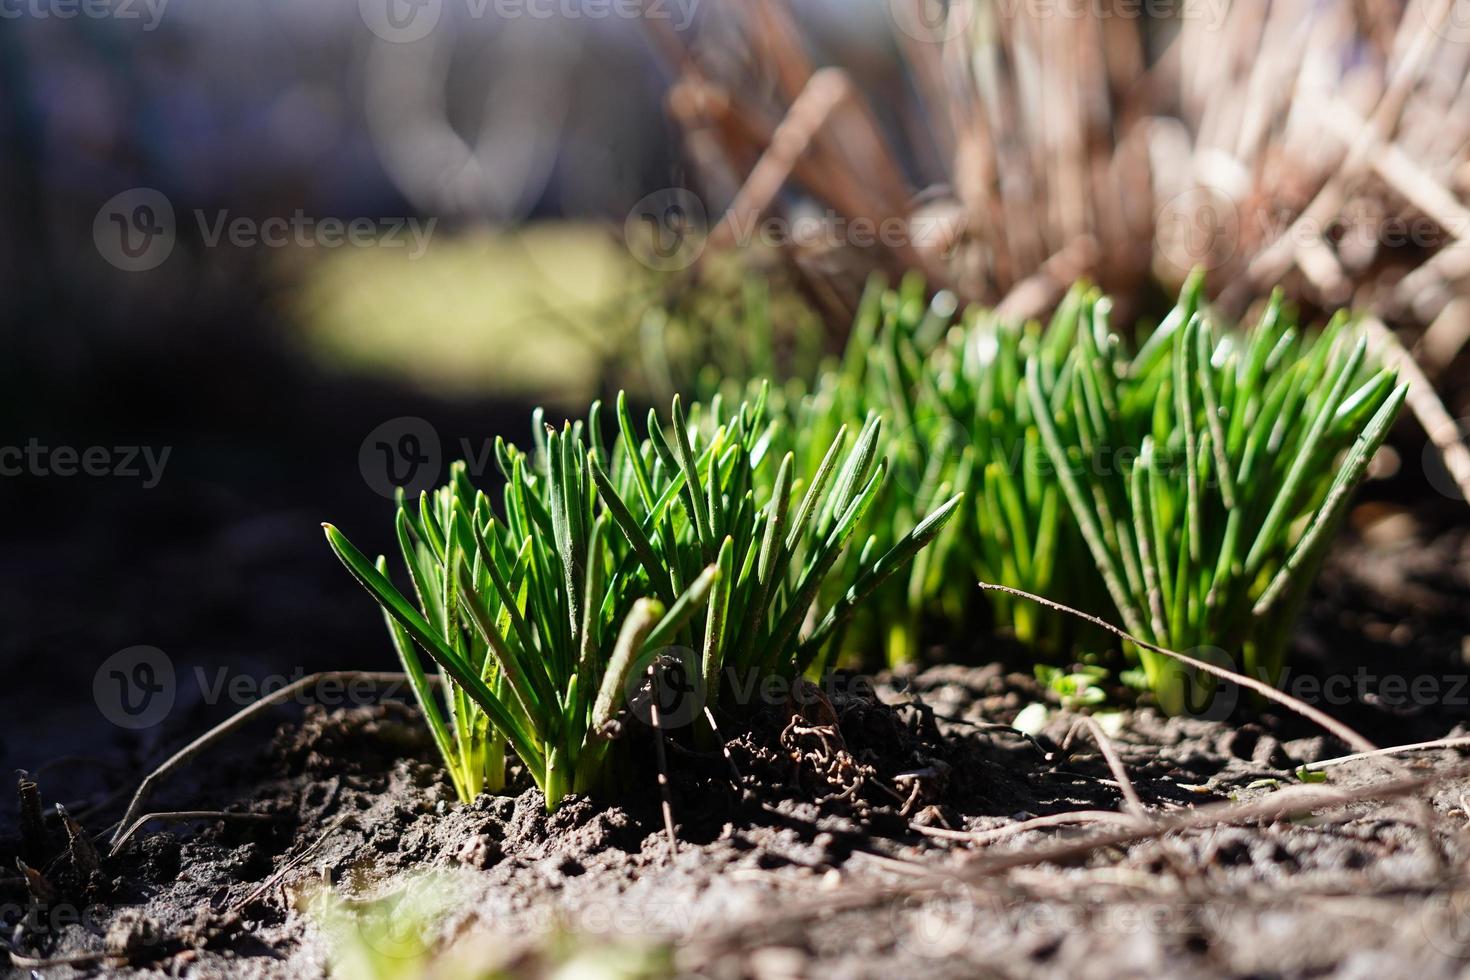 The First, Spring sprouts of Green Grass, on a warm sunny day, after a cold winter. Beauty in Nature. Close up. Copy space photo